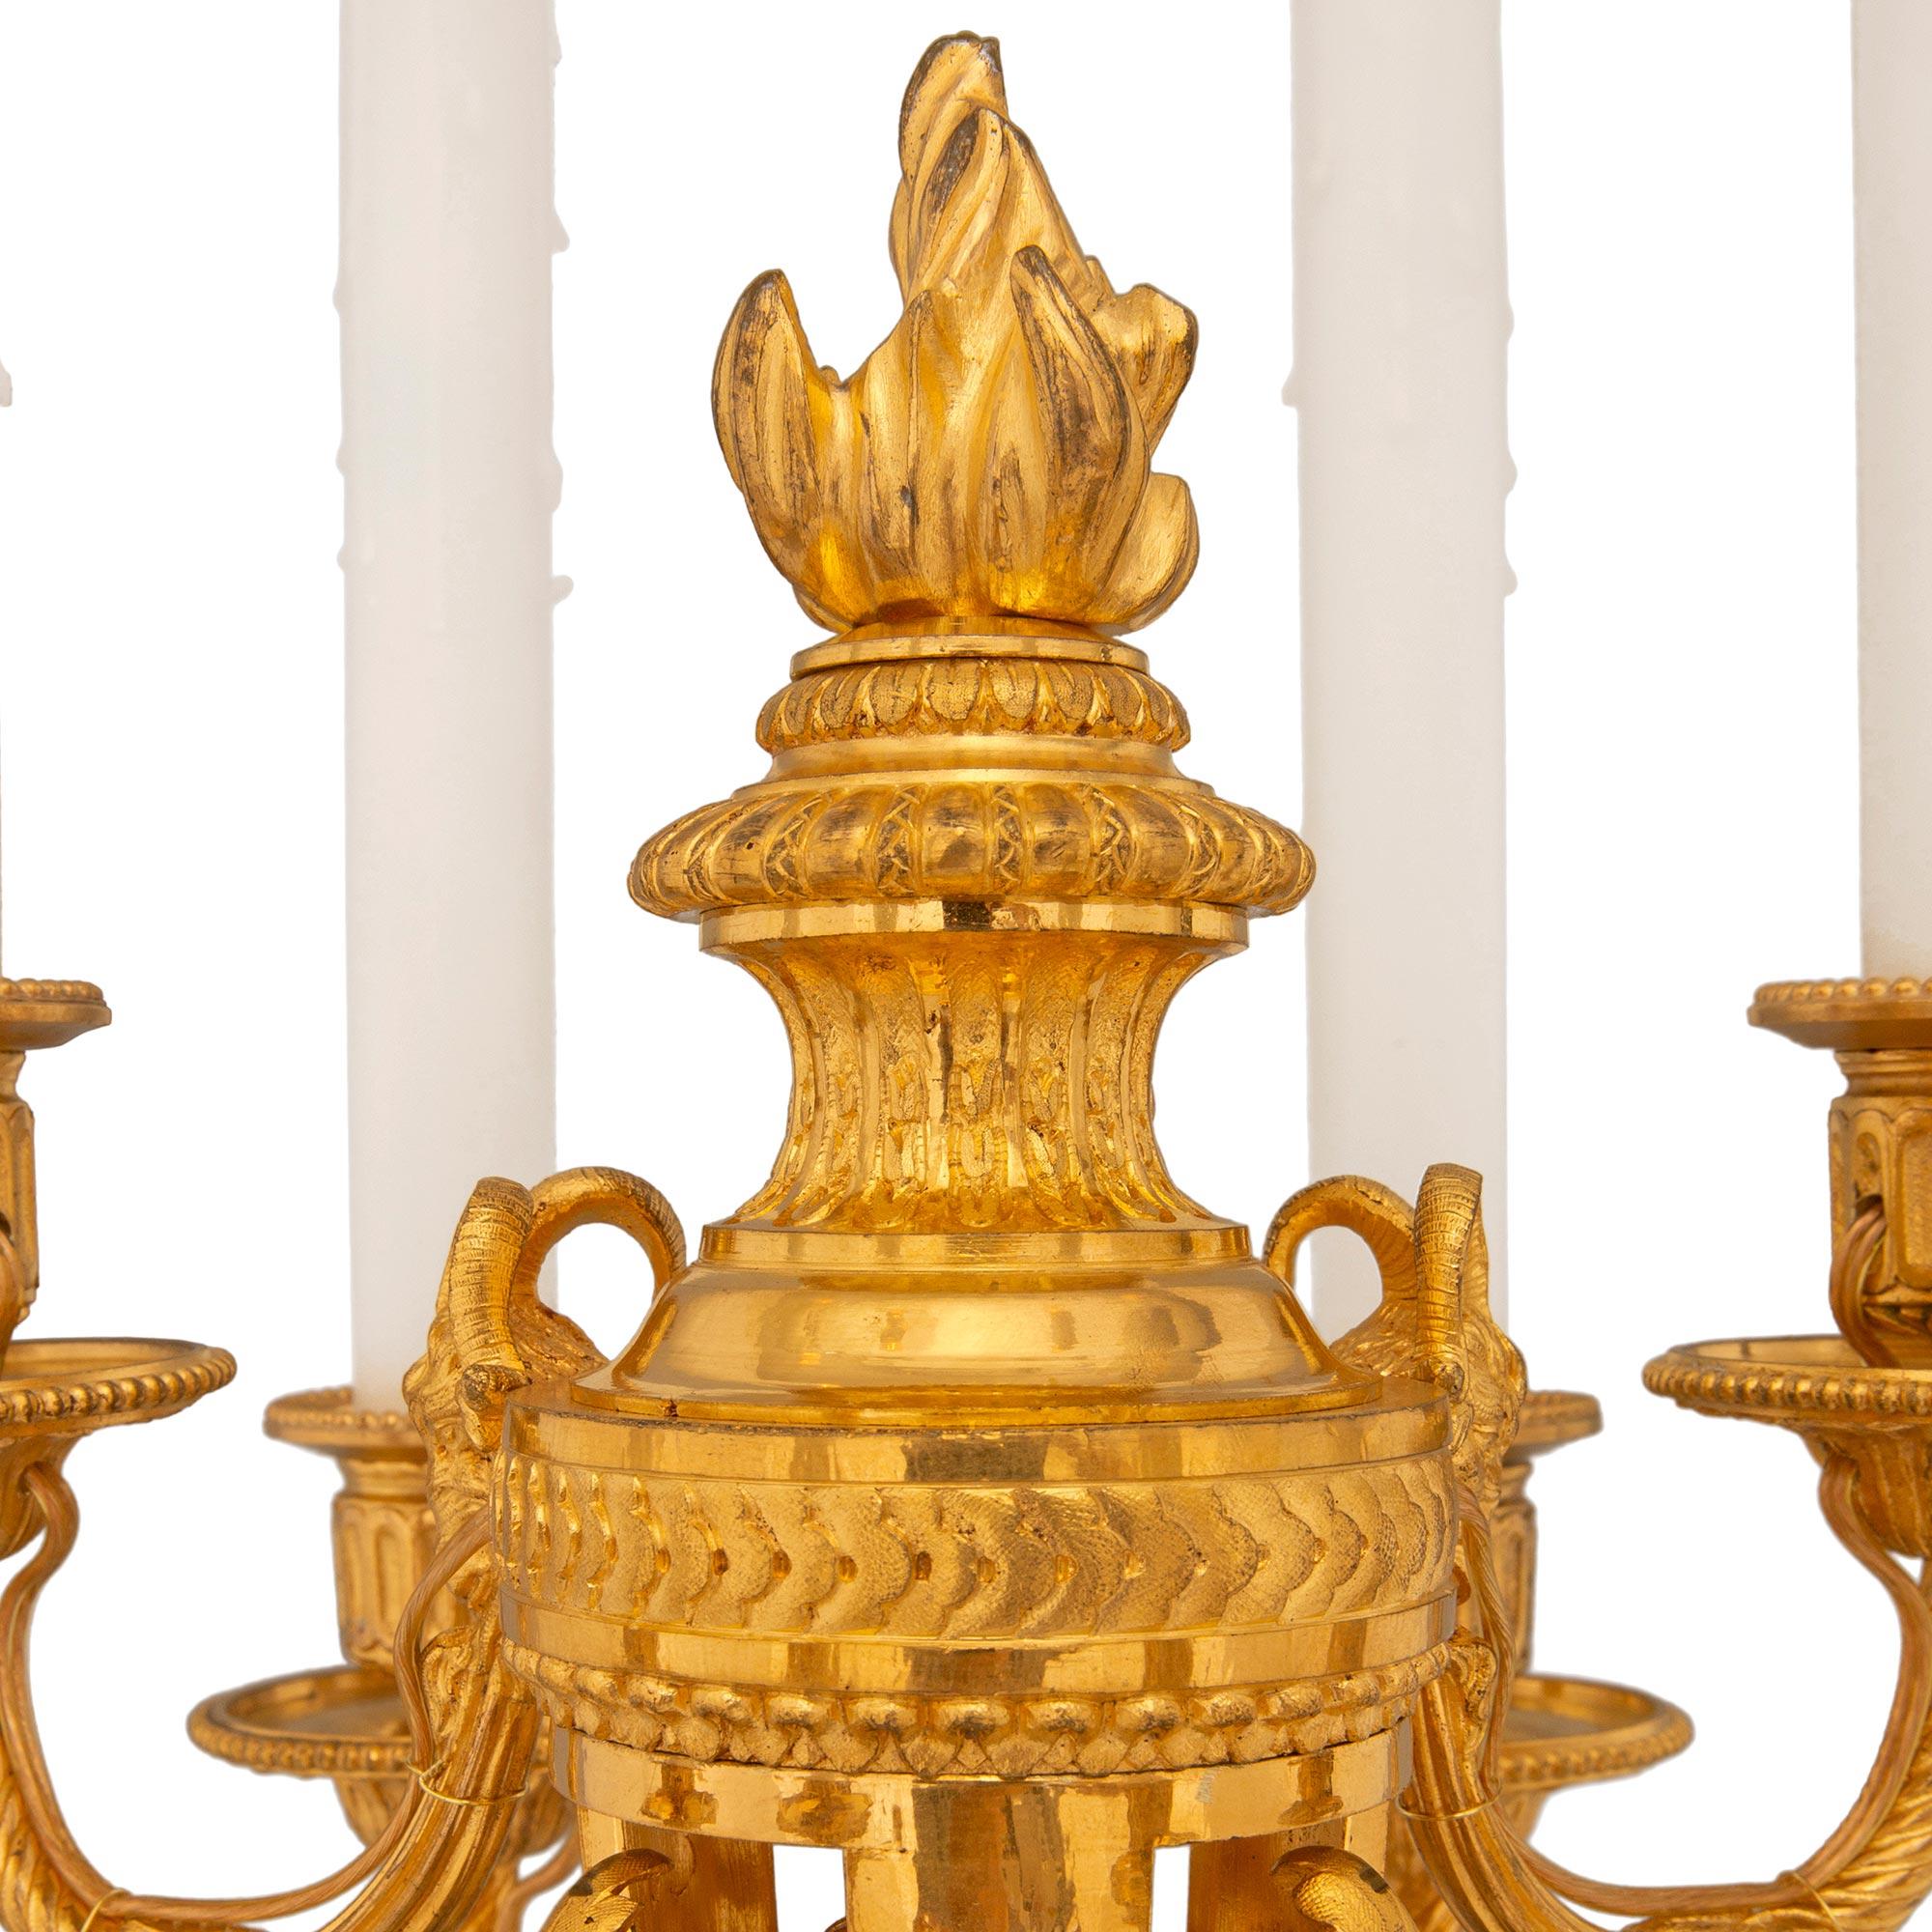 True Pair of French 19th Century Belle Époque Period Ormolu Candelabra Lamps For Sale 1